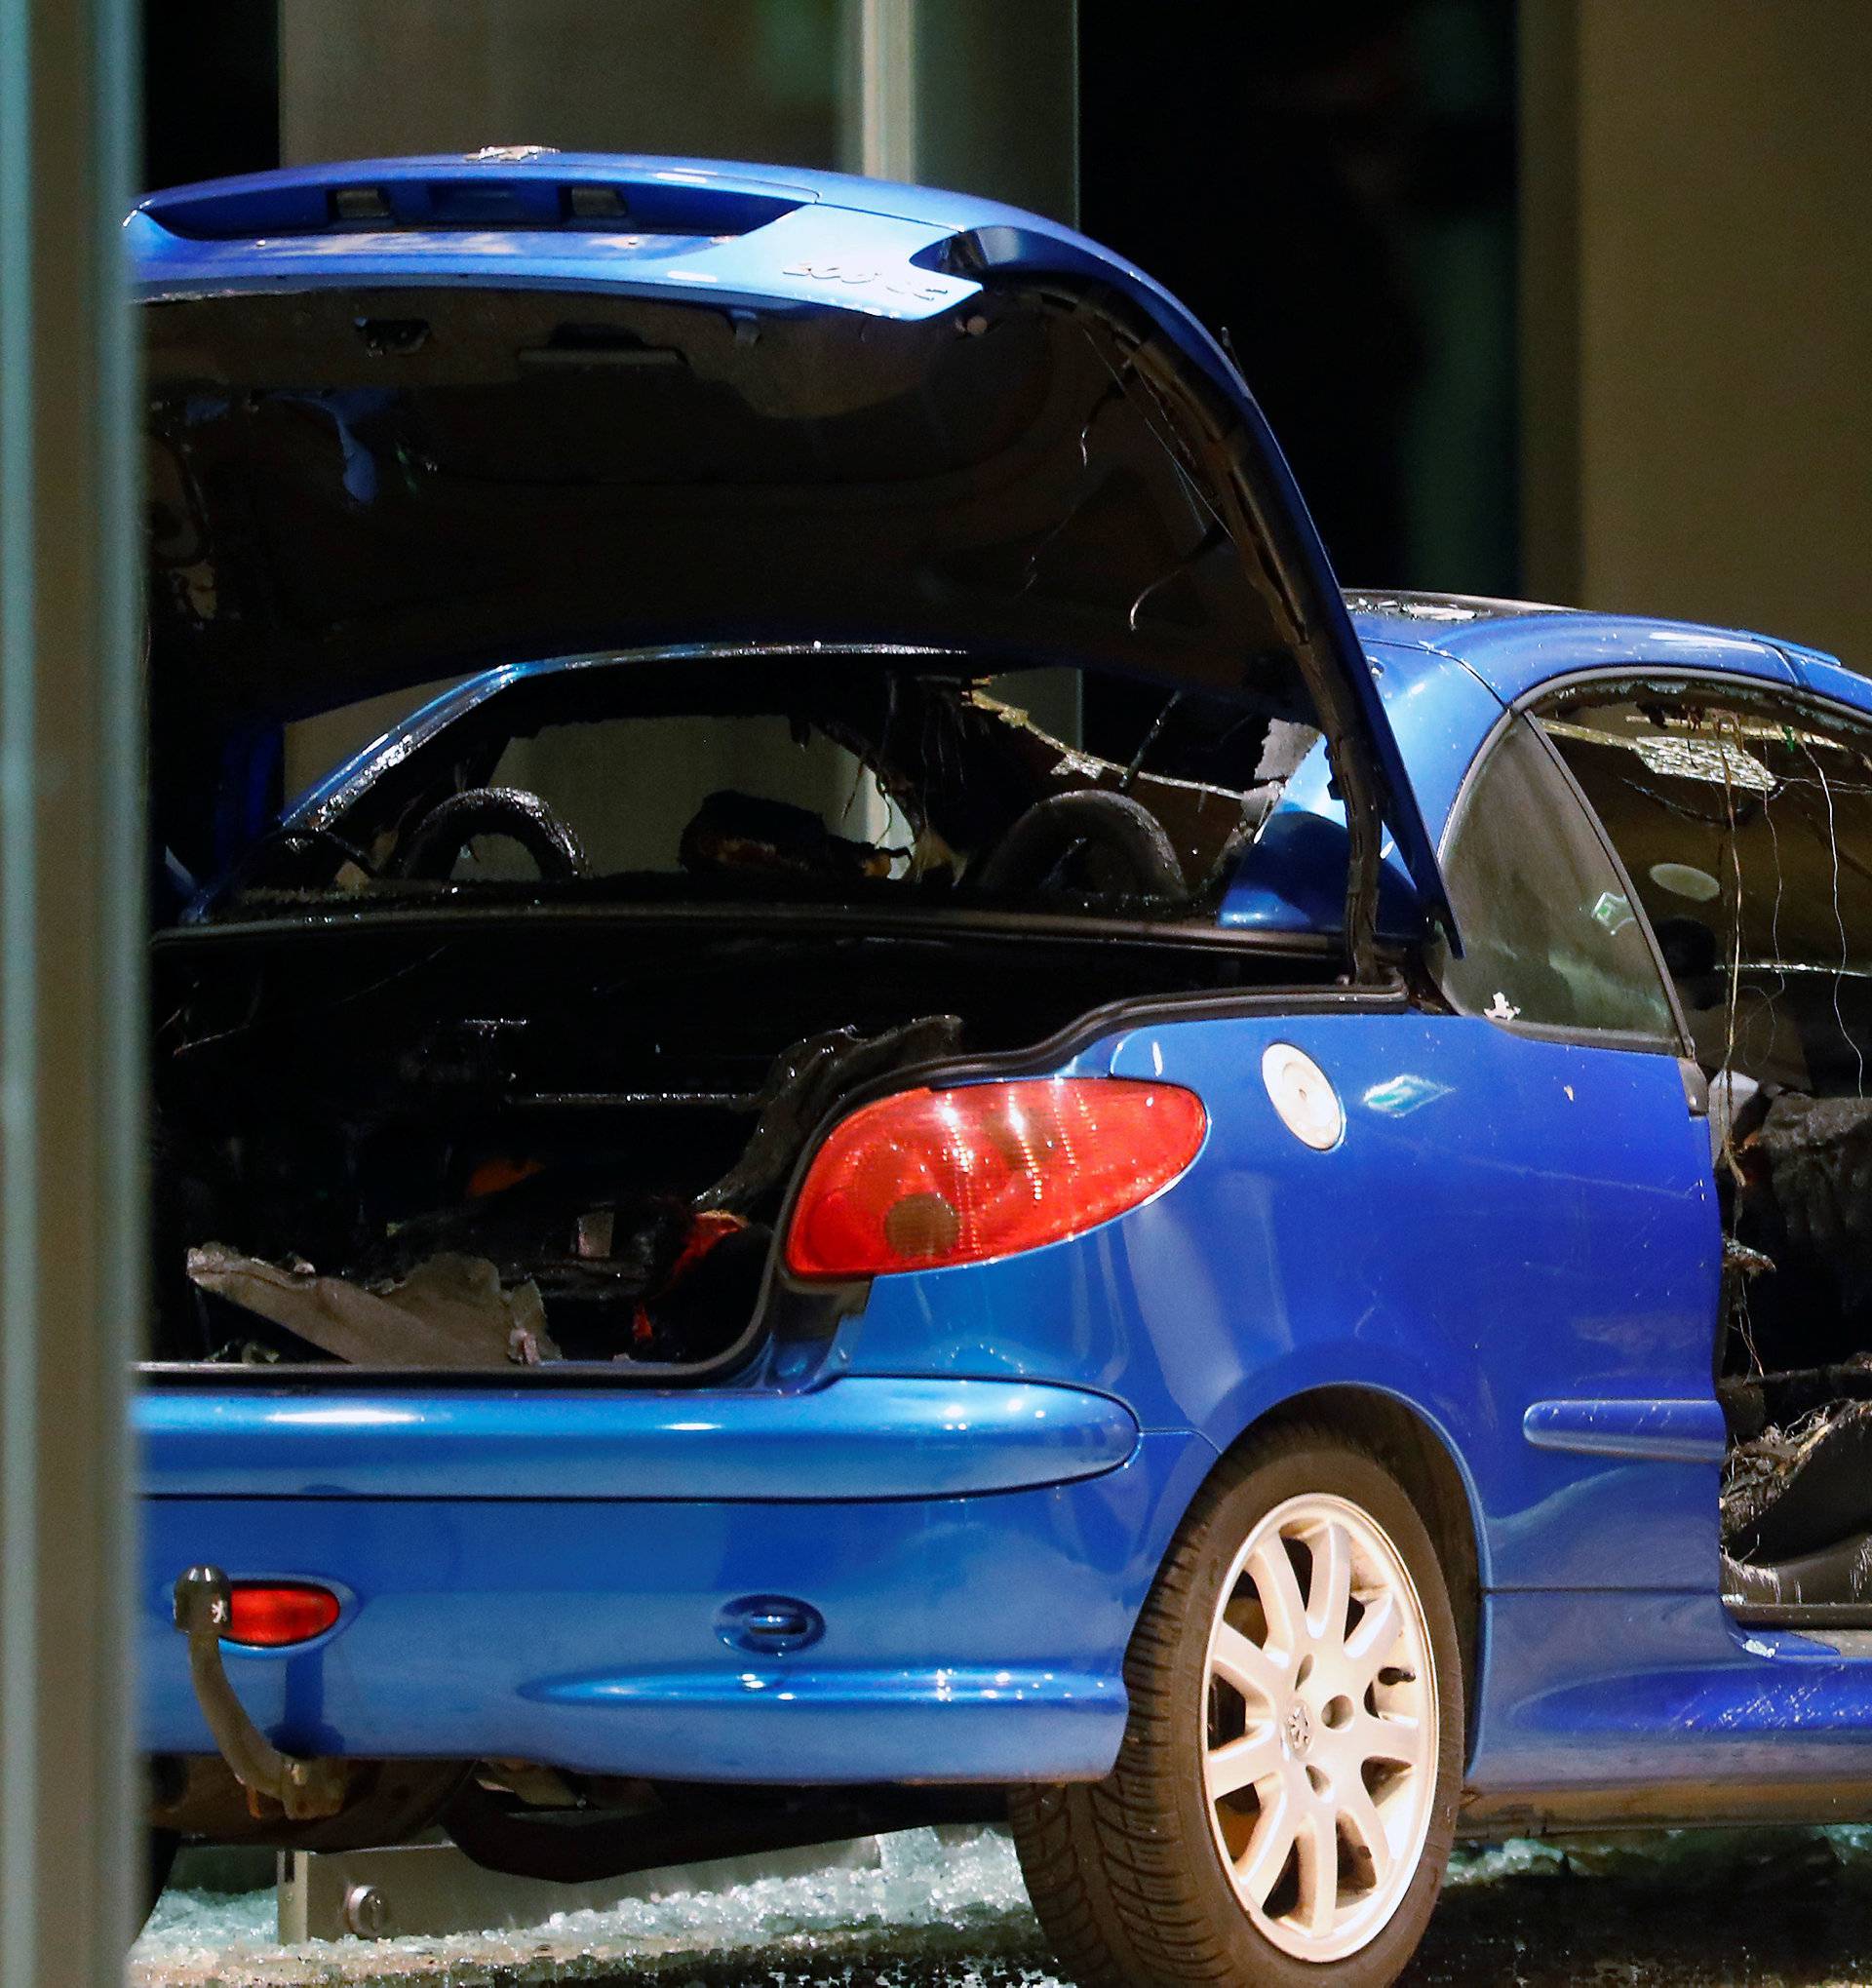 A damaged car is pictured inside the party headquarters of the Social Democratic Party of Germany (SPD) after it crashed into the building in Berlin